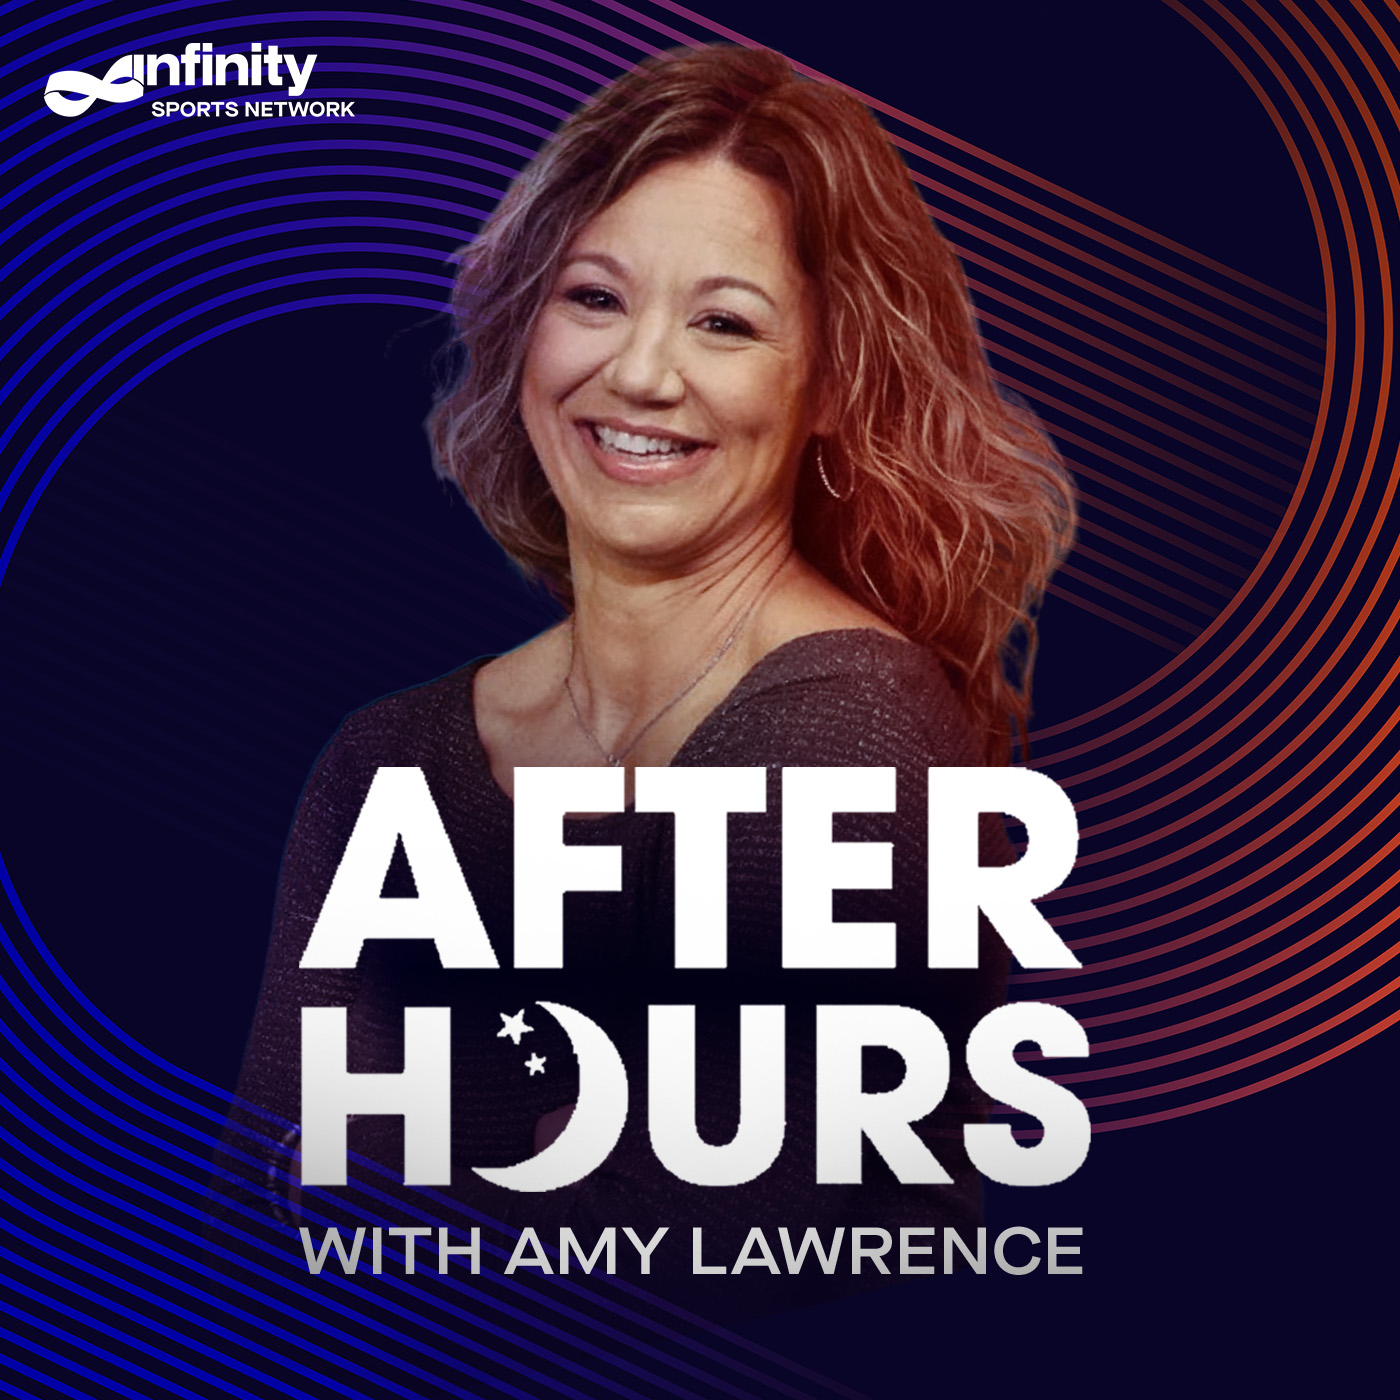 08/4/21 After Hours with Amy Lawrence PODCAST: Hour 3